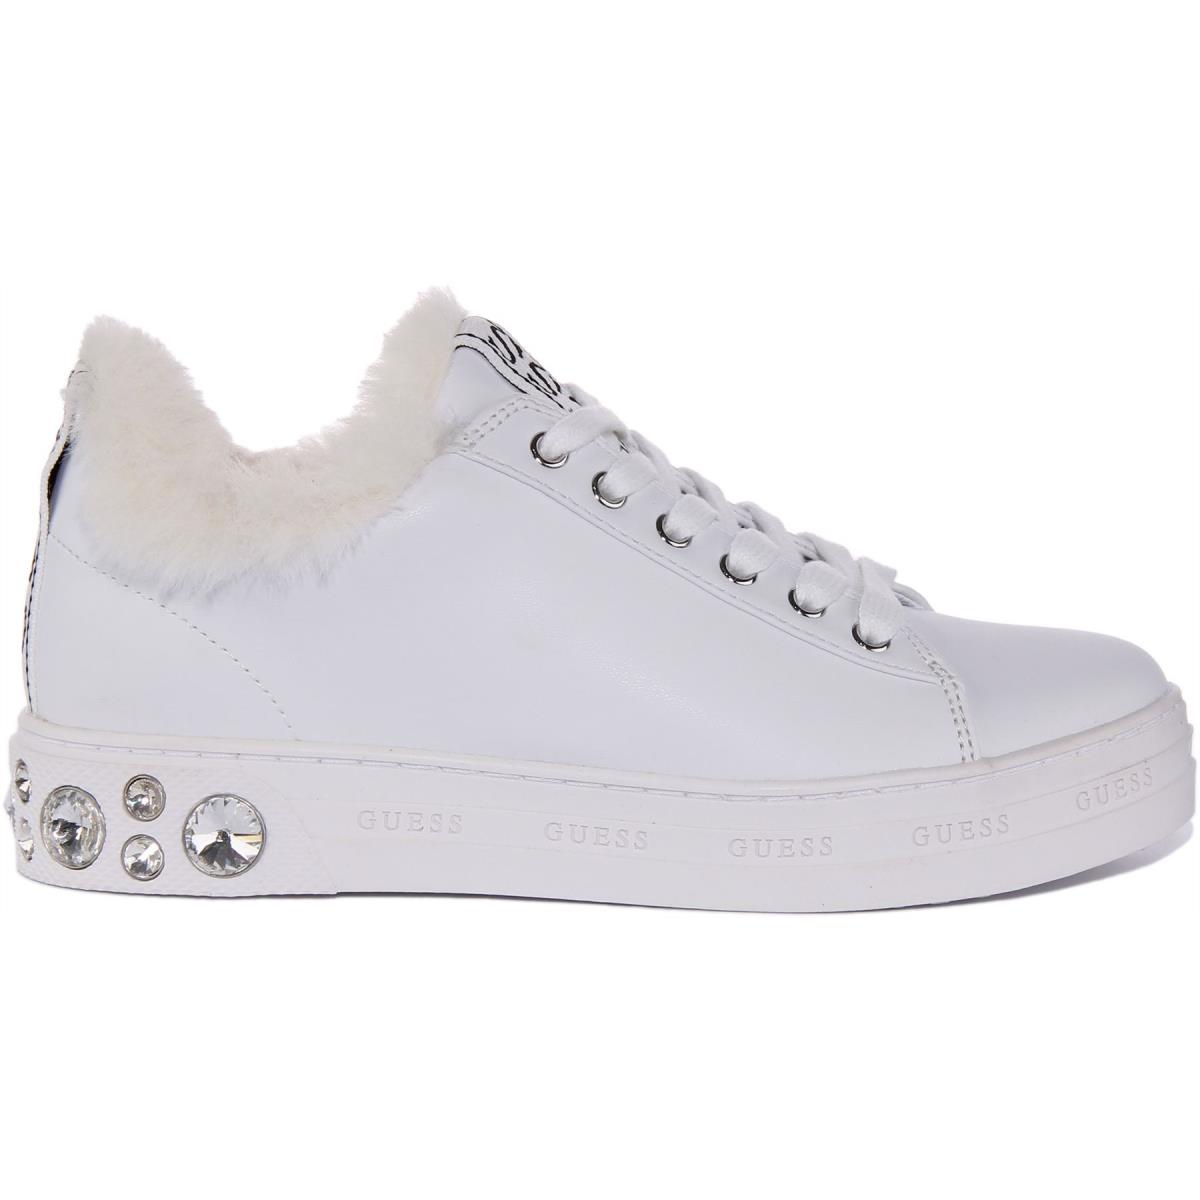 Guess Fl8Rv5Ele12 Rivet Womens Lace Up Stylish Sneakers In White Size US 5 - 11